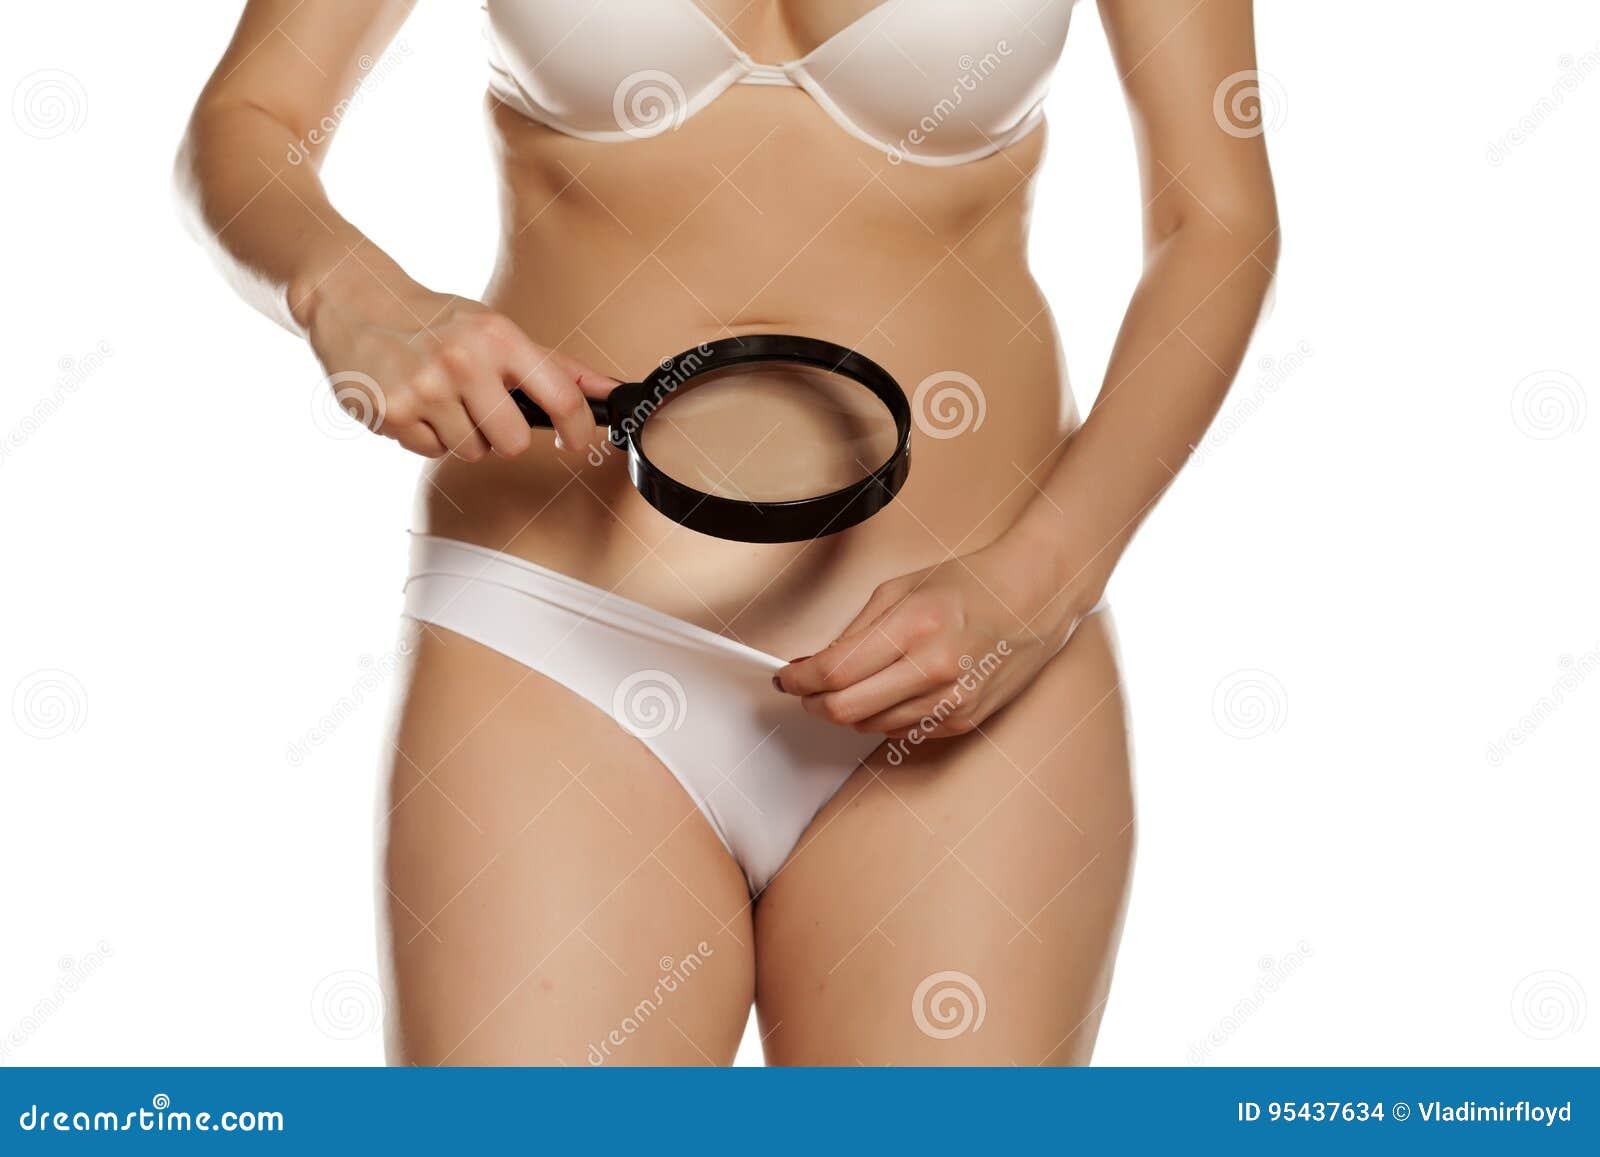 Looking at her crotch stock photo. Image of epilation - 95437634